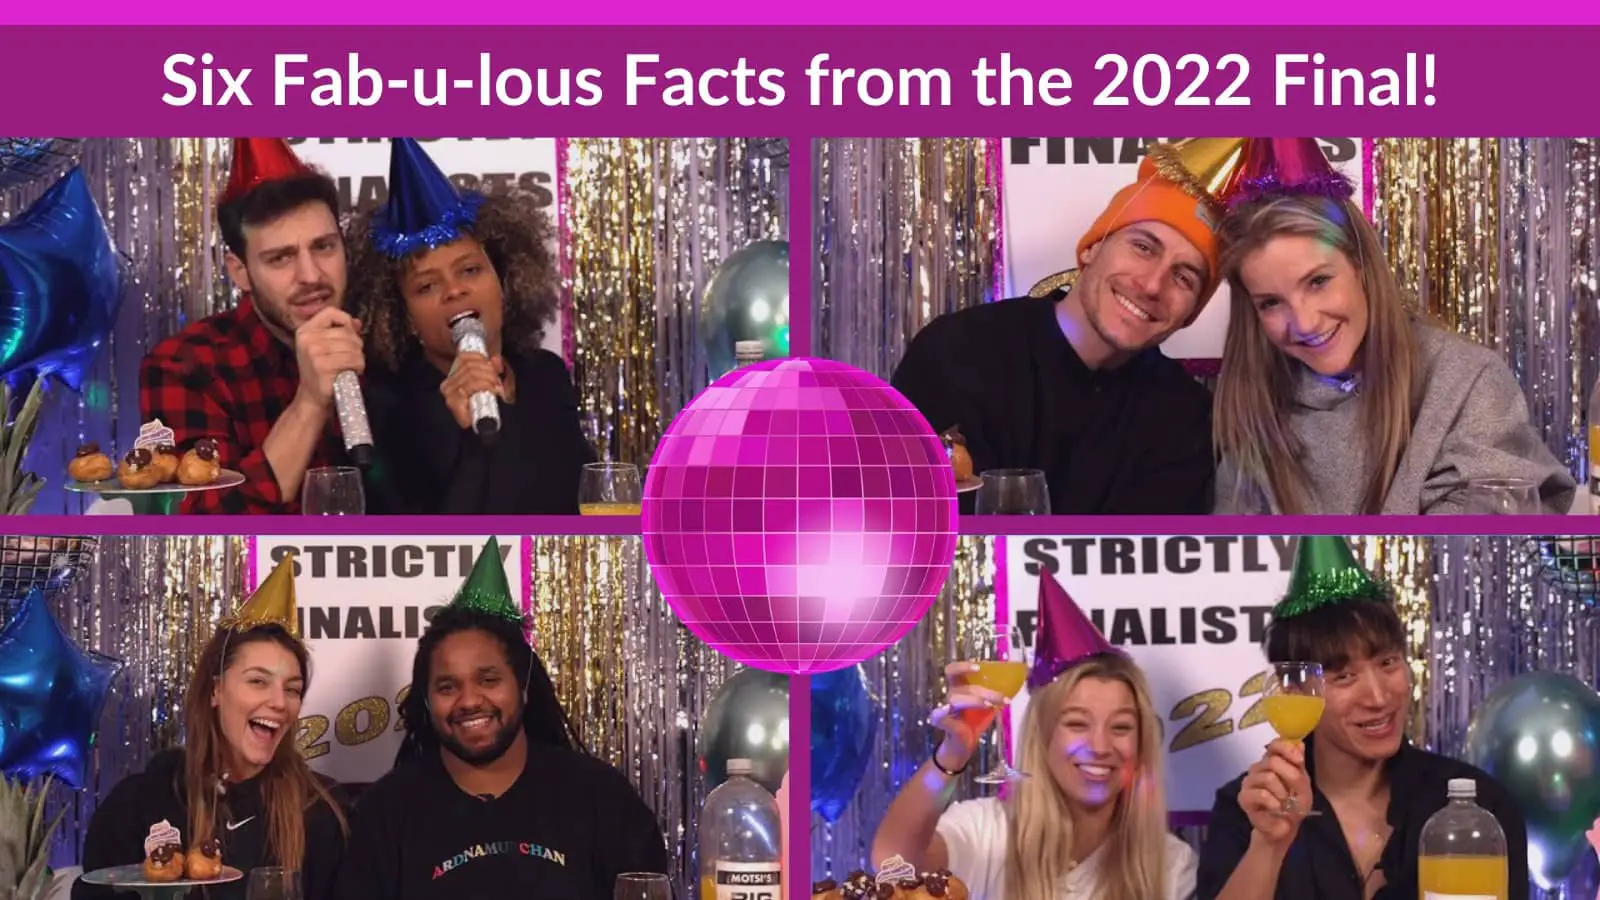 The 2022 finalists in party hats